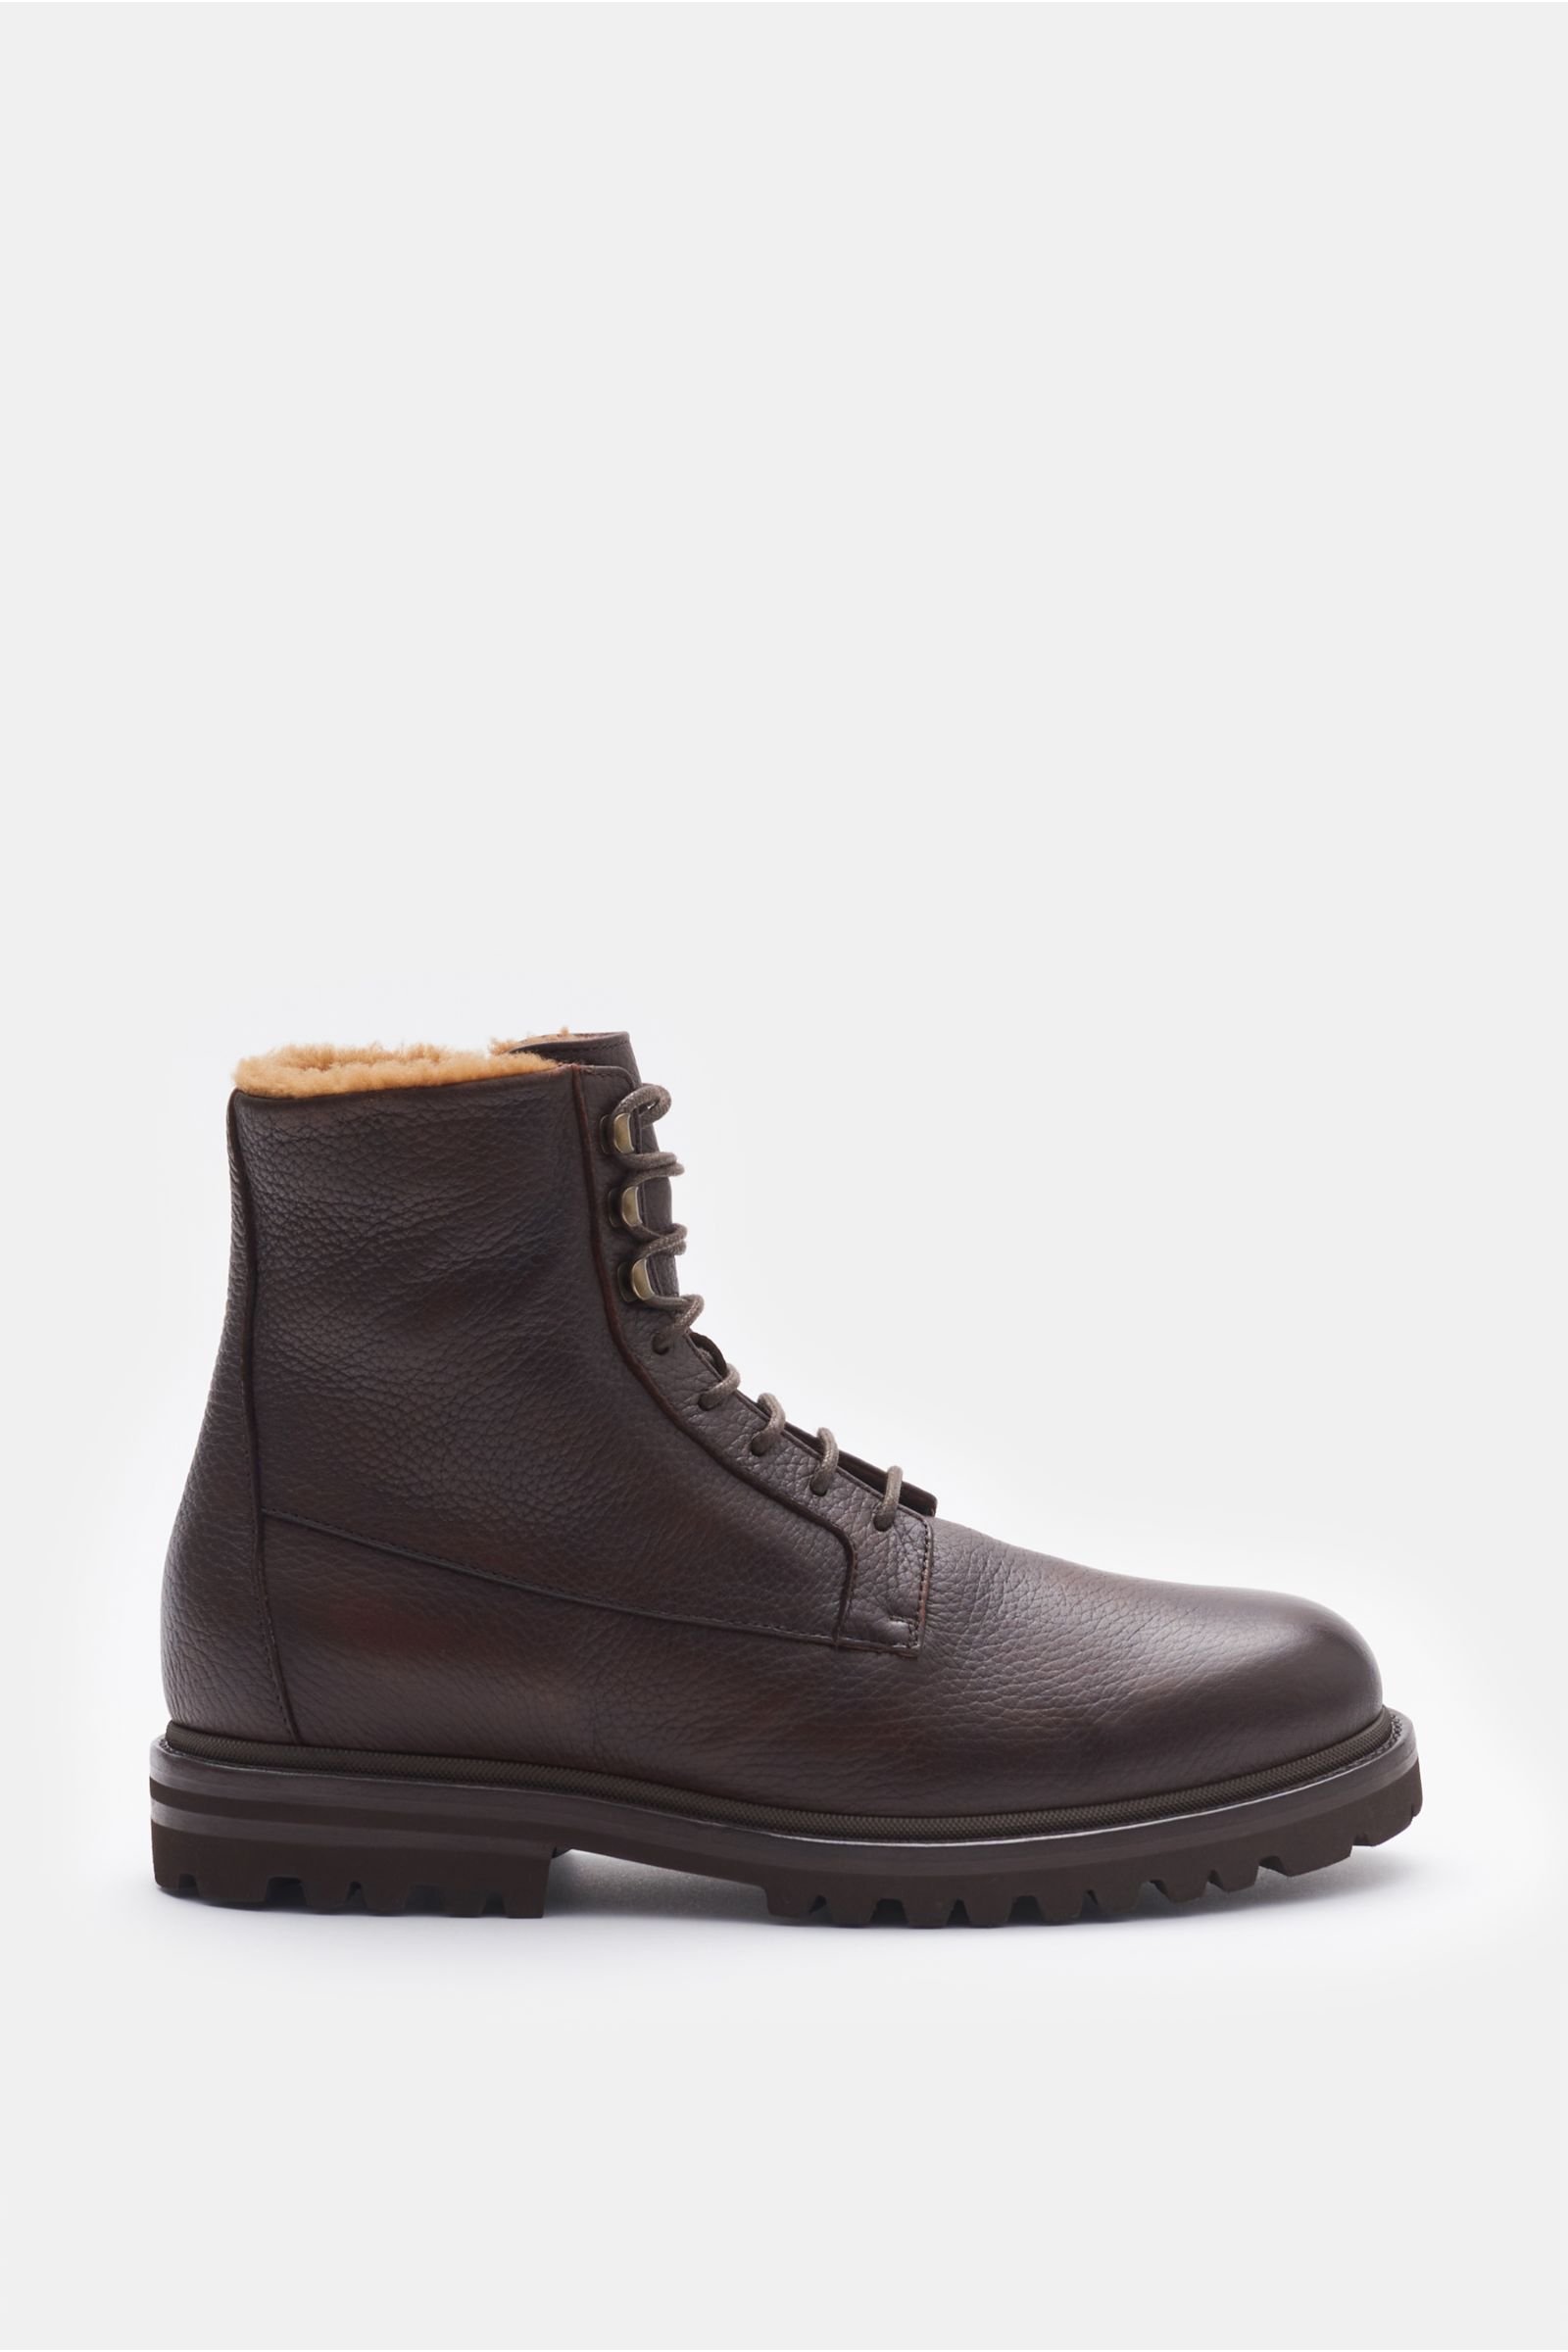 Lace-up boots dark brown